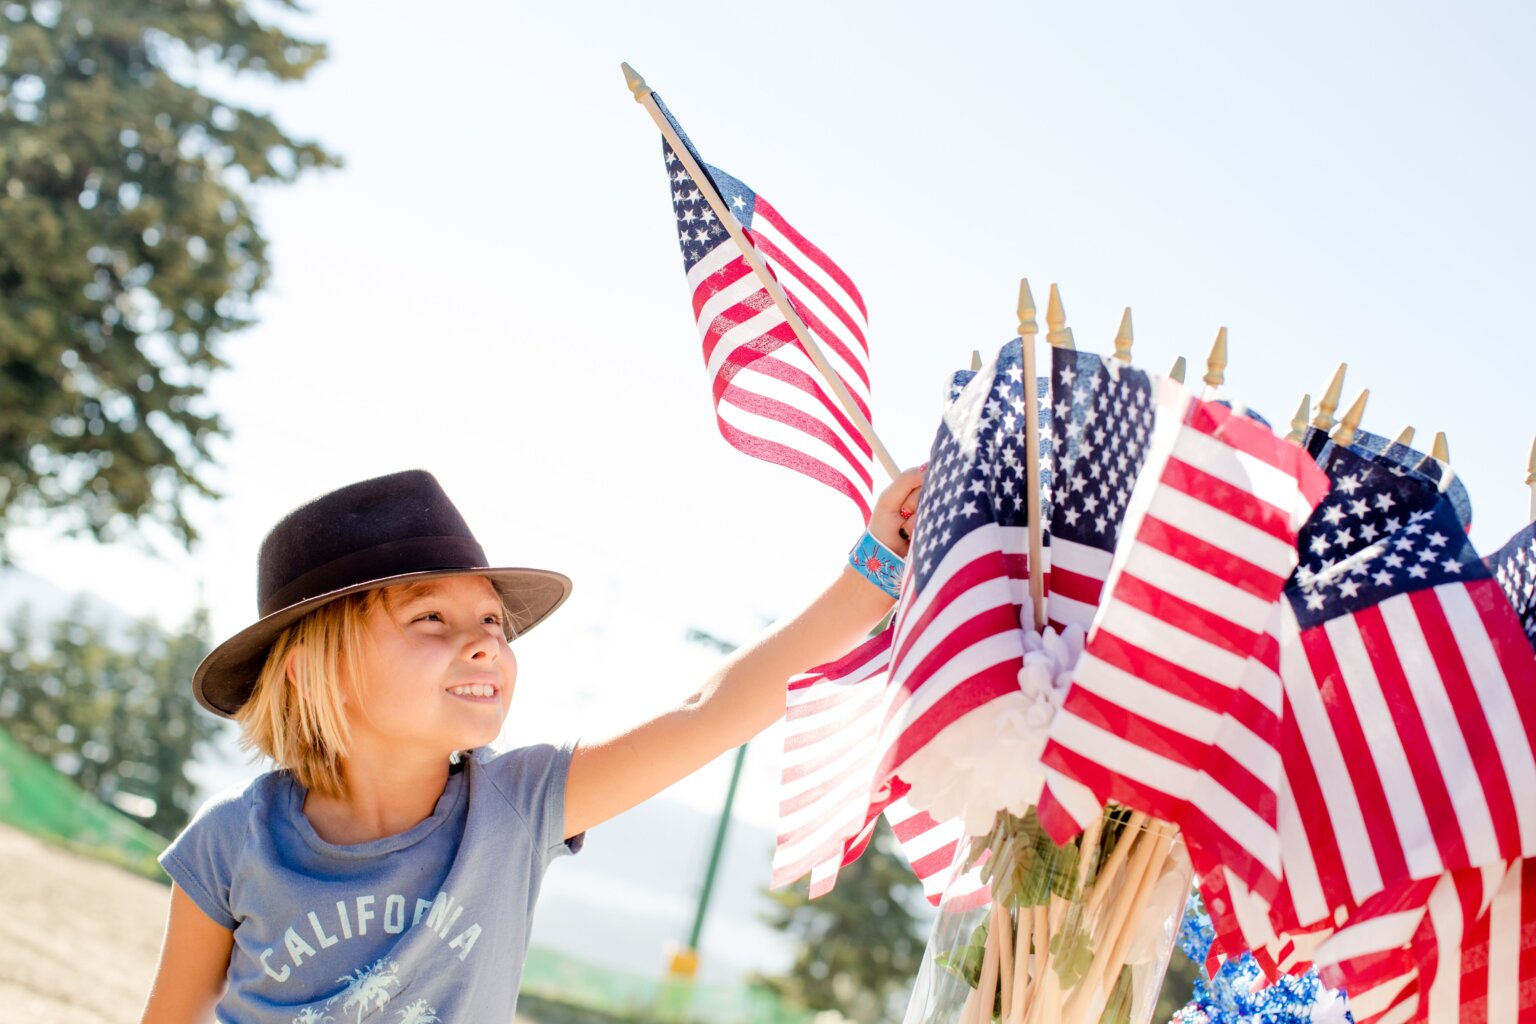 A boy in a California T-shirt picking up a small American flag from a vase of other little American flags for the Fourth of July.